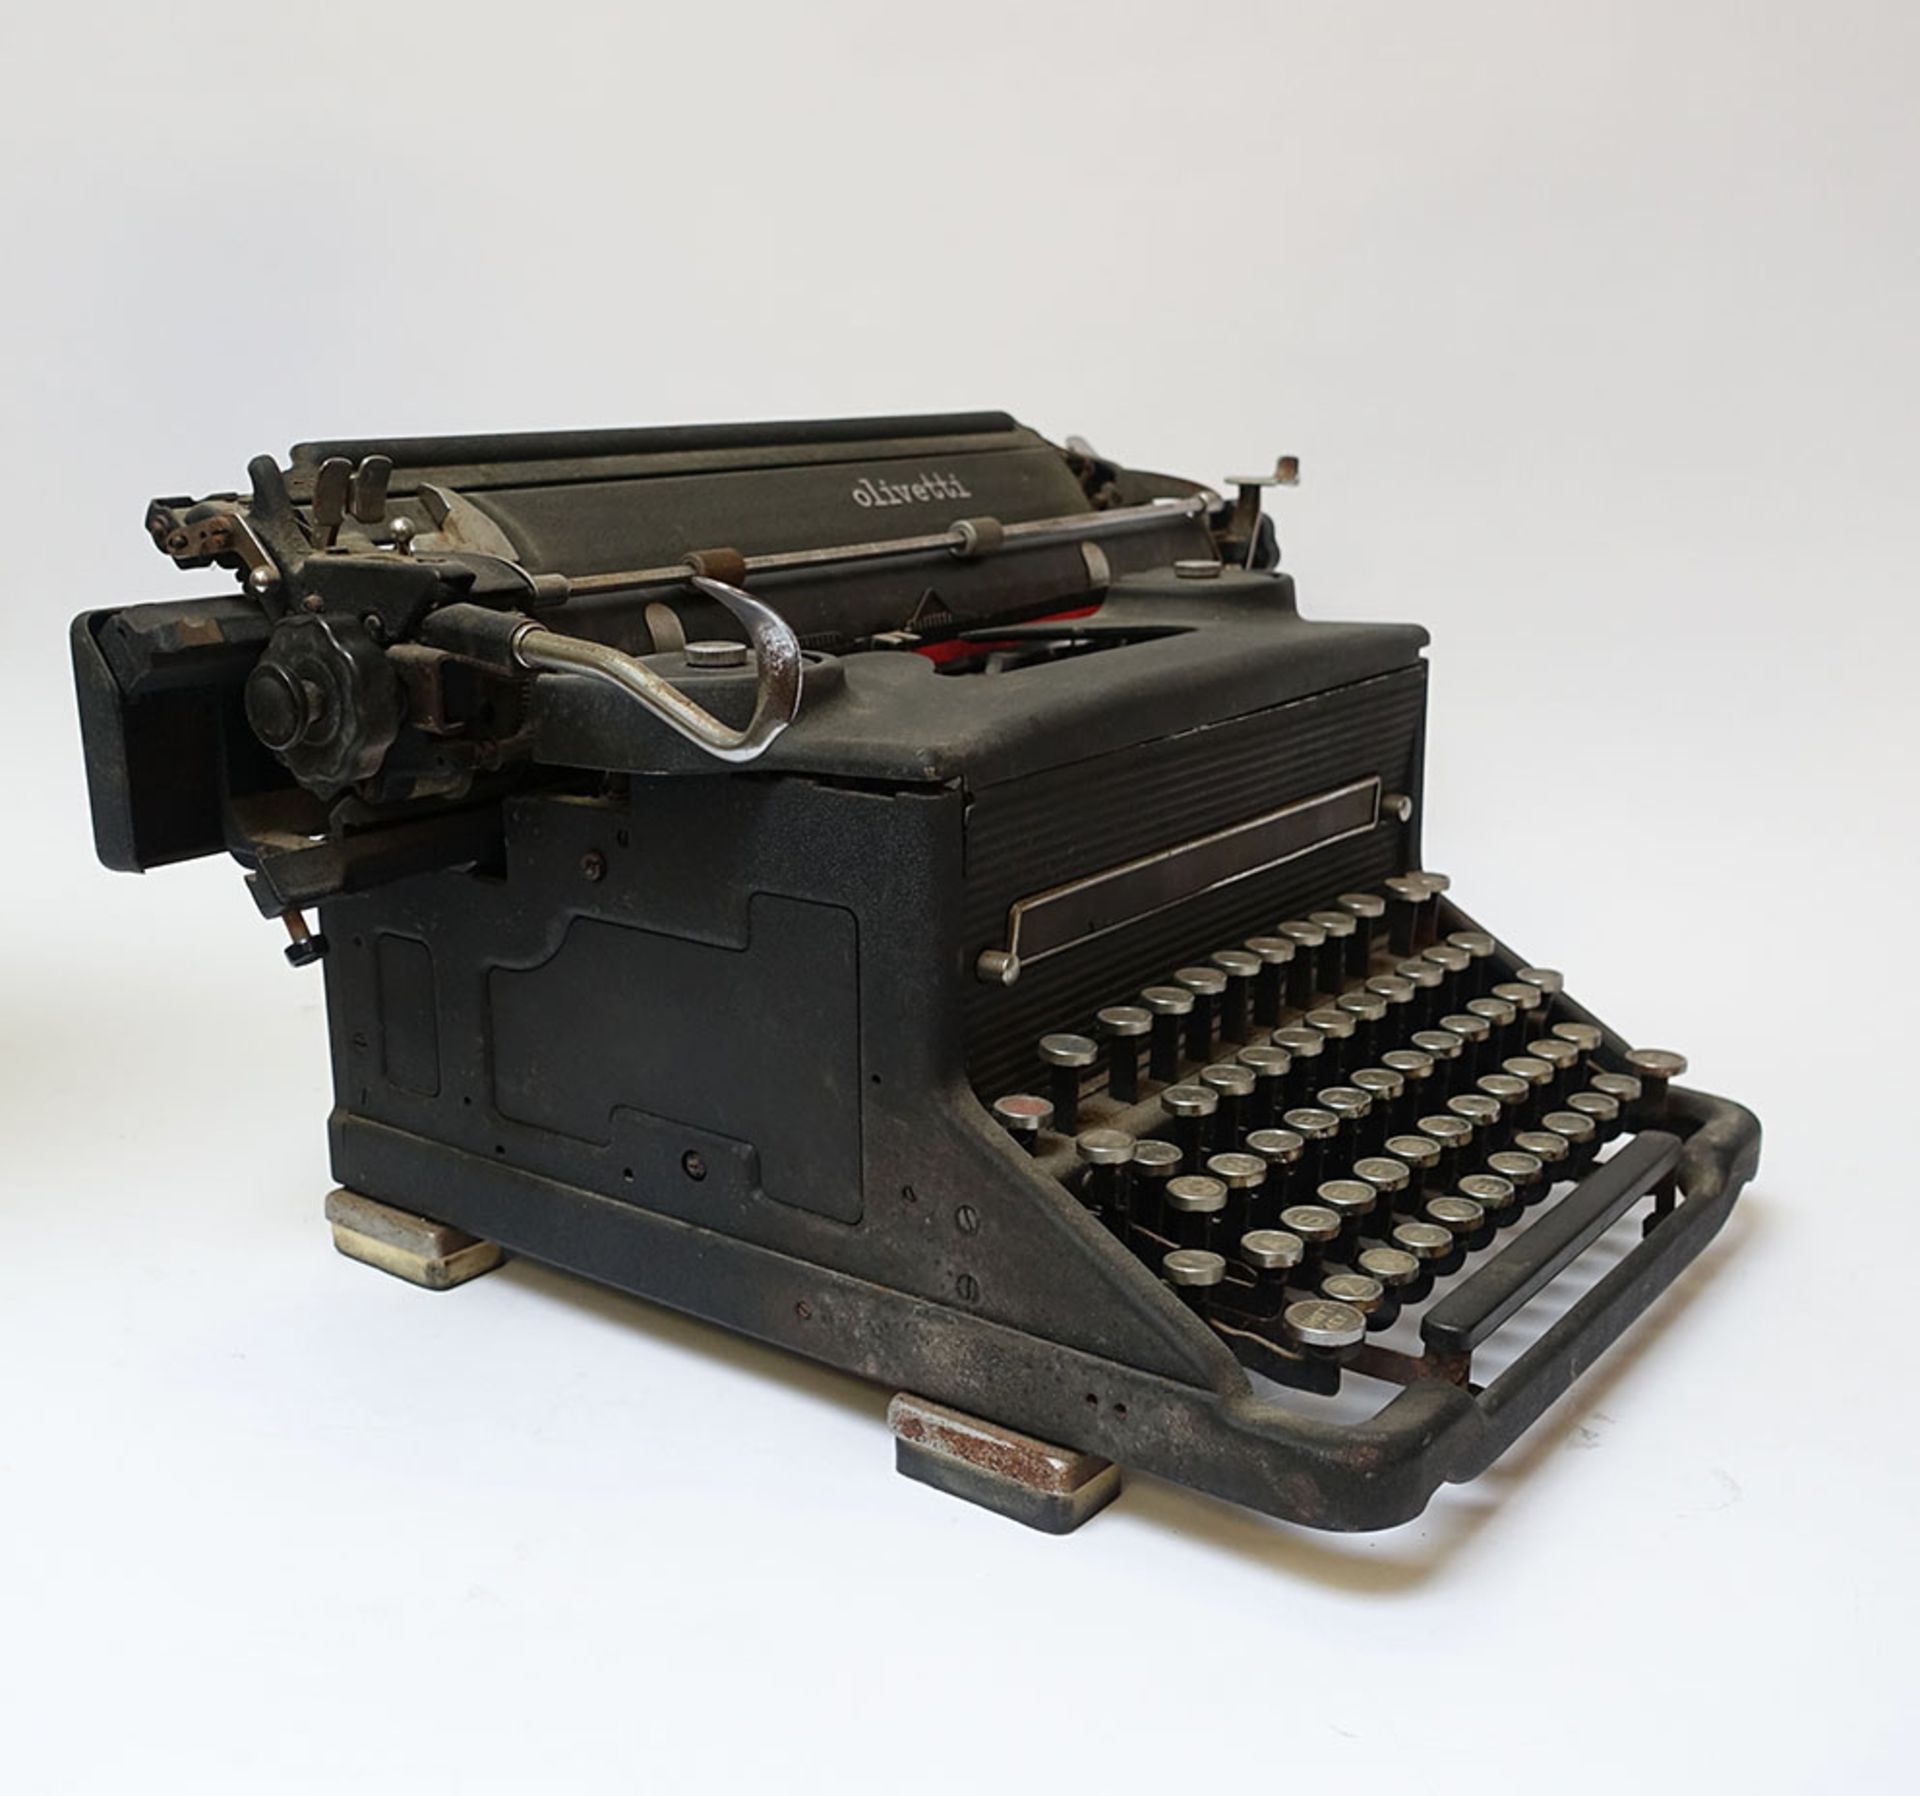 OLIVETTI M40/3 TYPEWRITER. Italy, years of production 1946/47. Amost 18 kg. - Sold without any